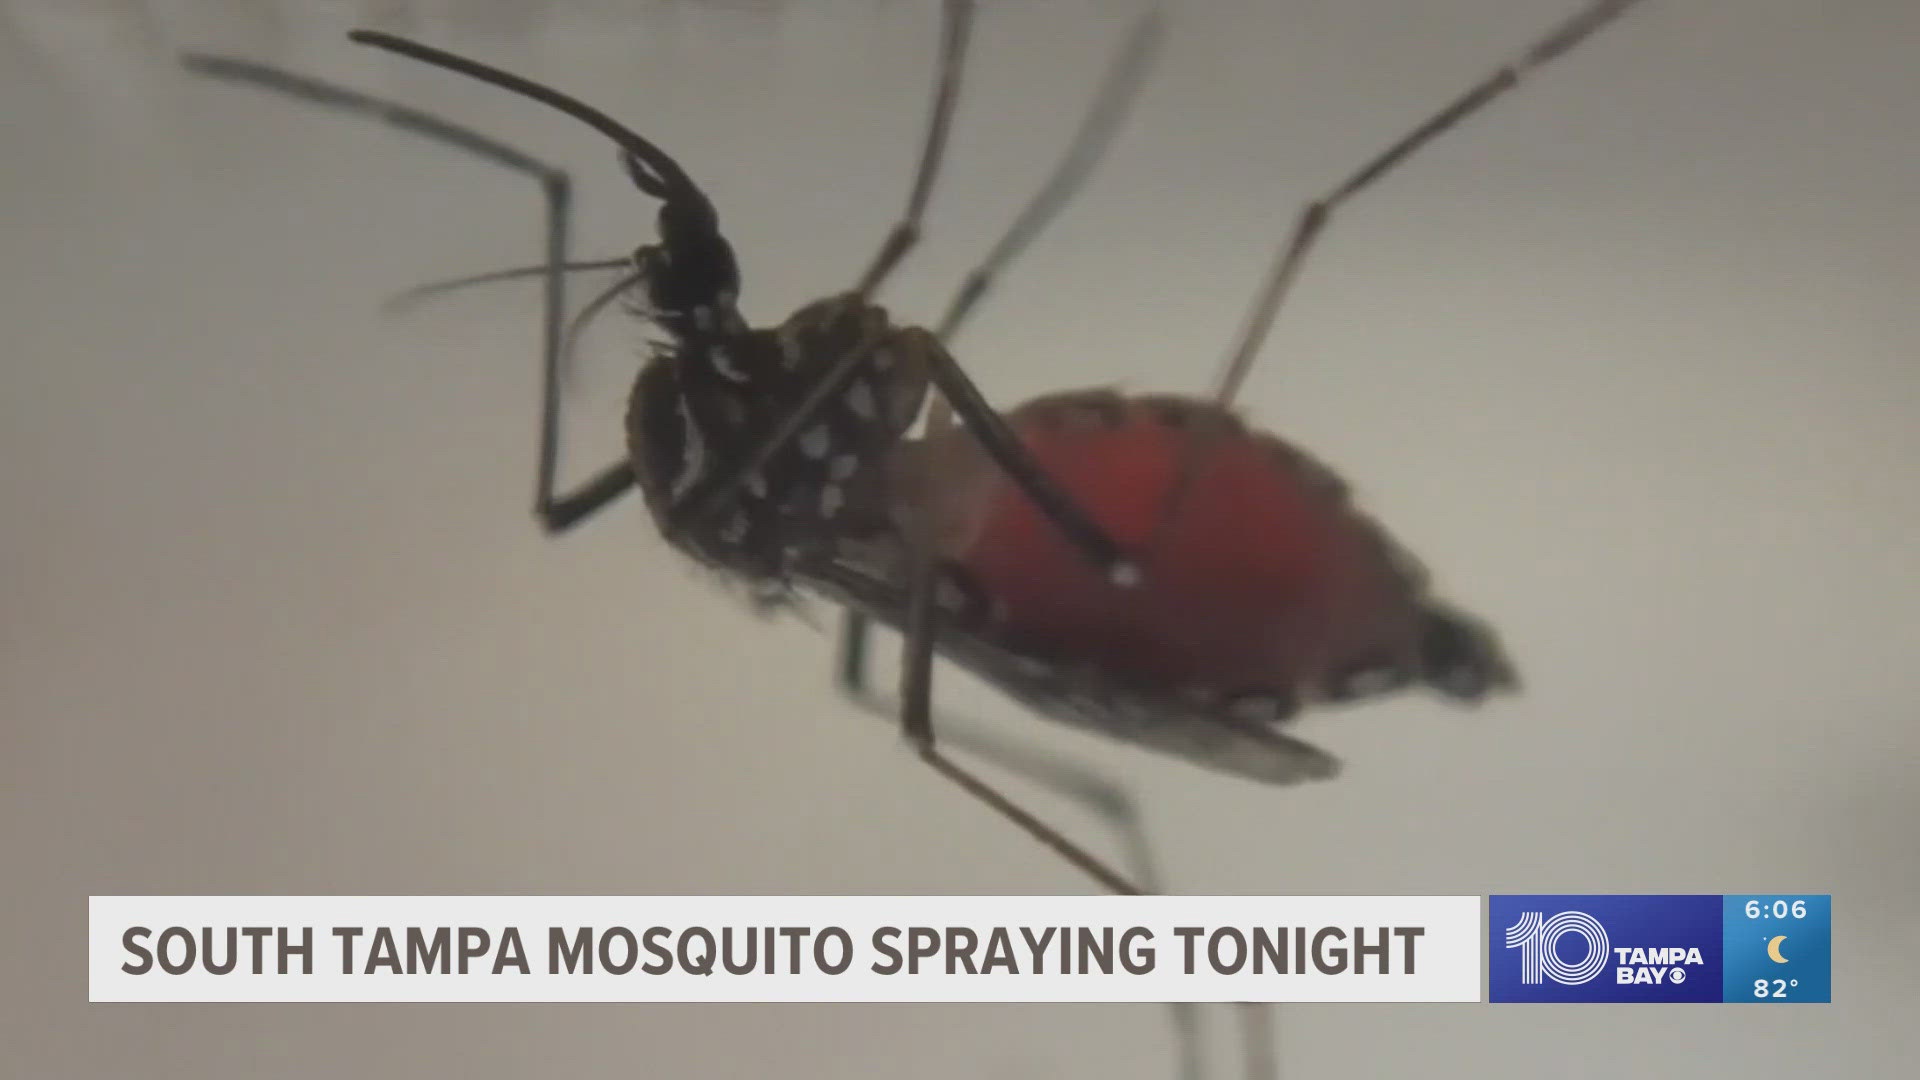 The Hillsborough County Mosquito Management will spray more than 17,000 acres in South Tampa on Monday night.